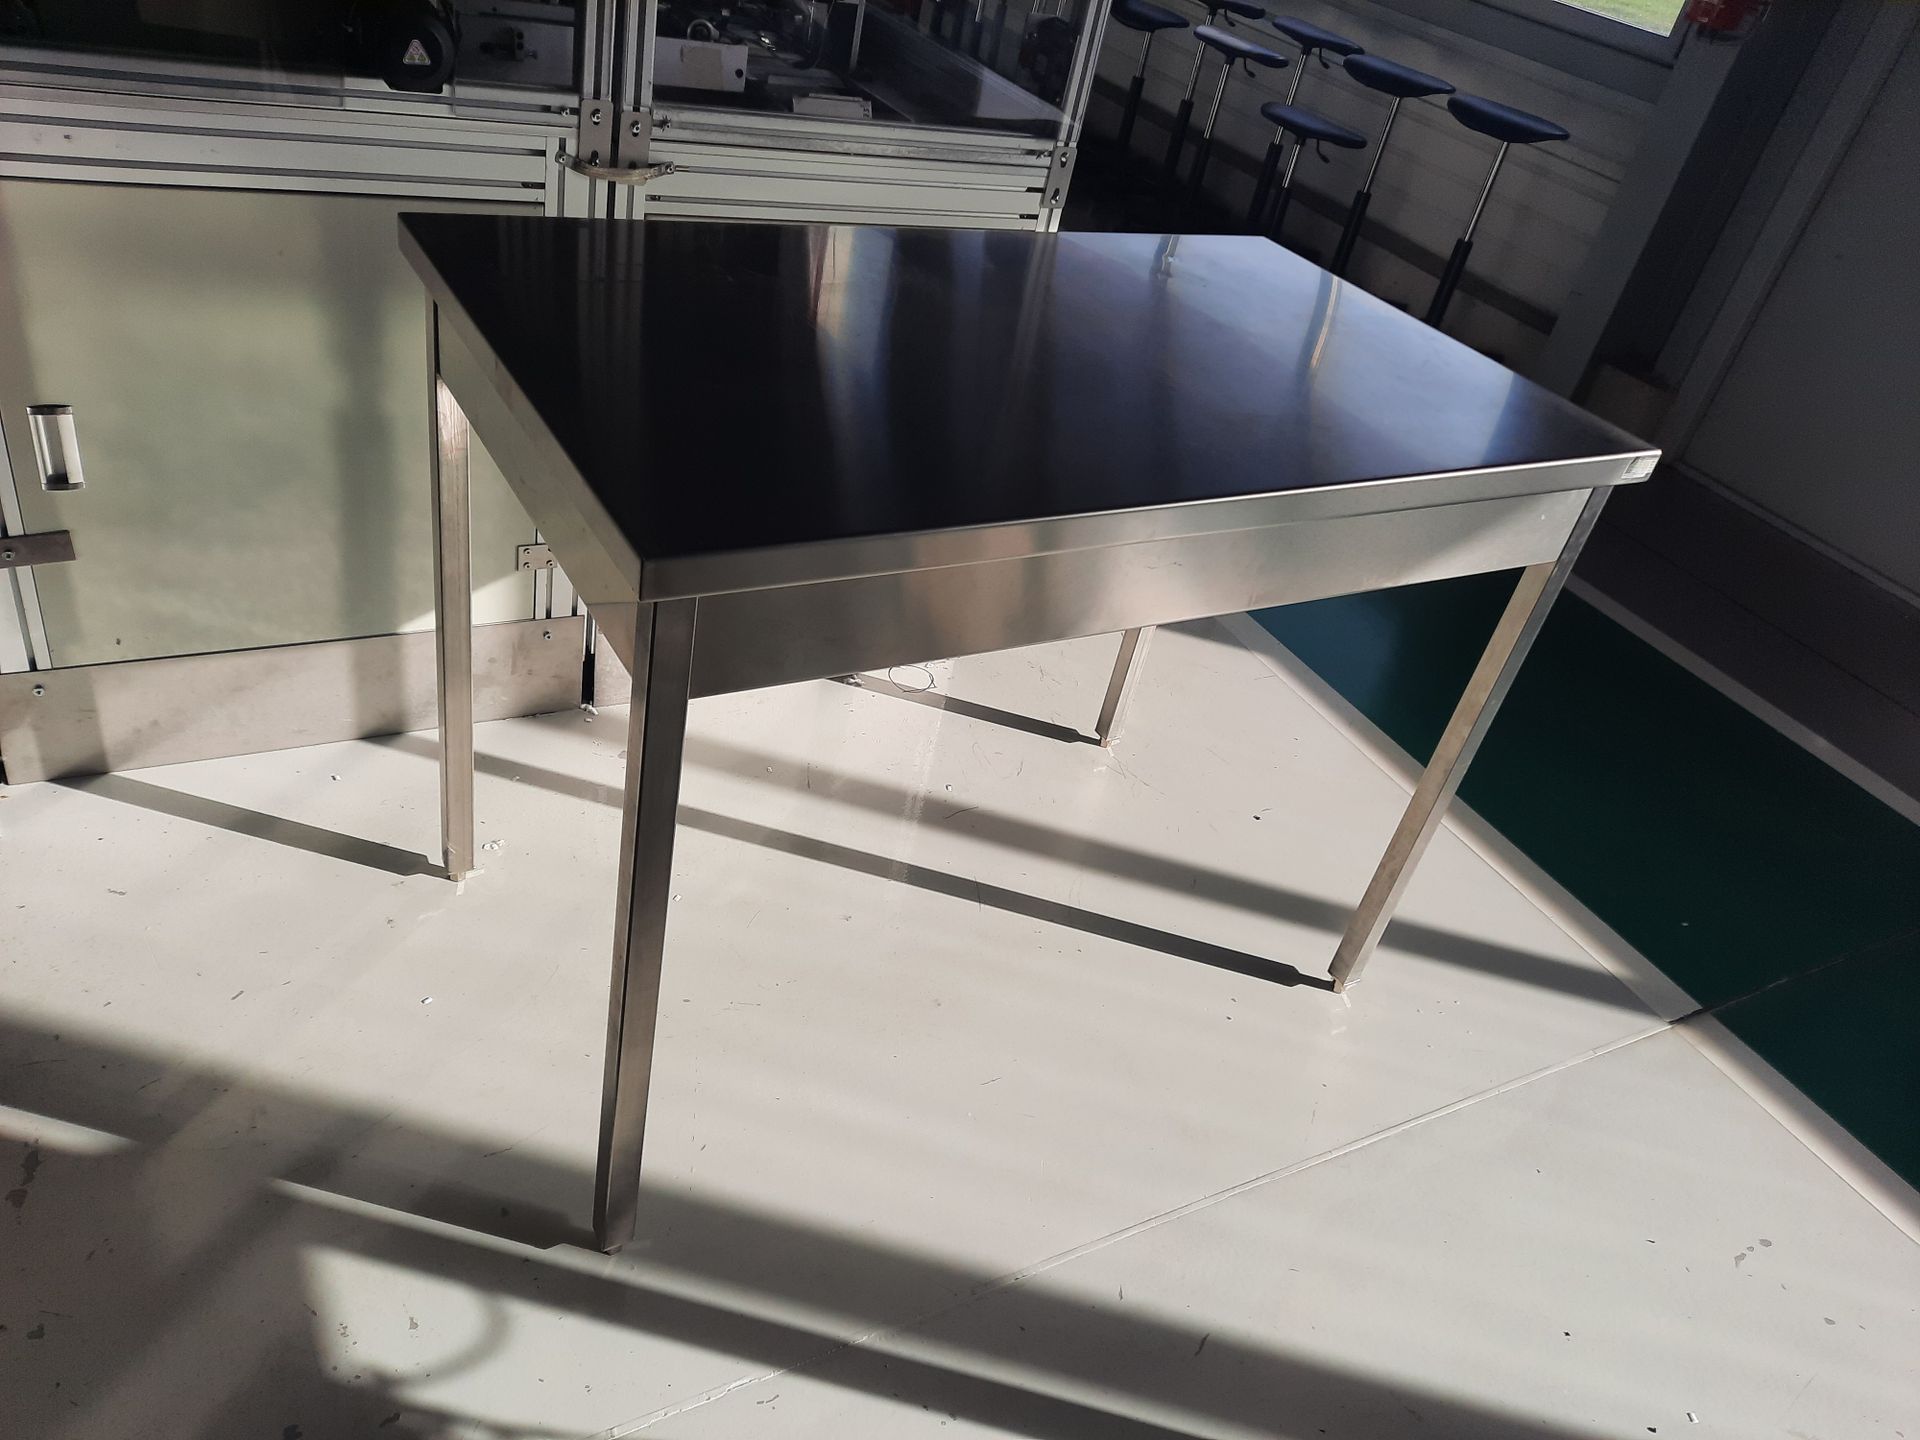 Null 1 set of 2 BOURGEAT stainless steel tables, size 1,200 x 700 mm